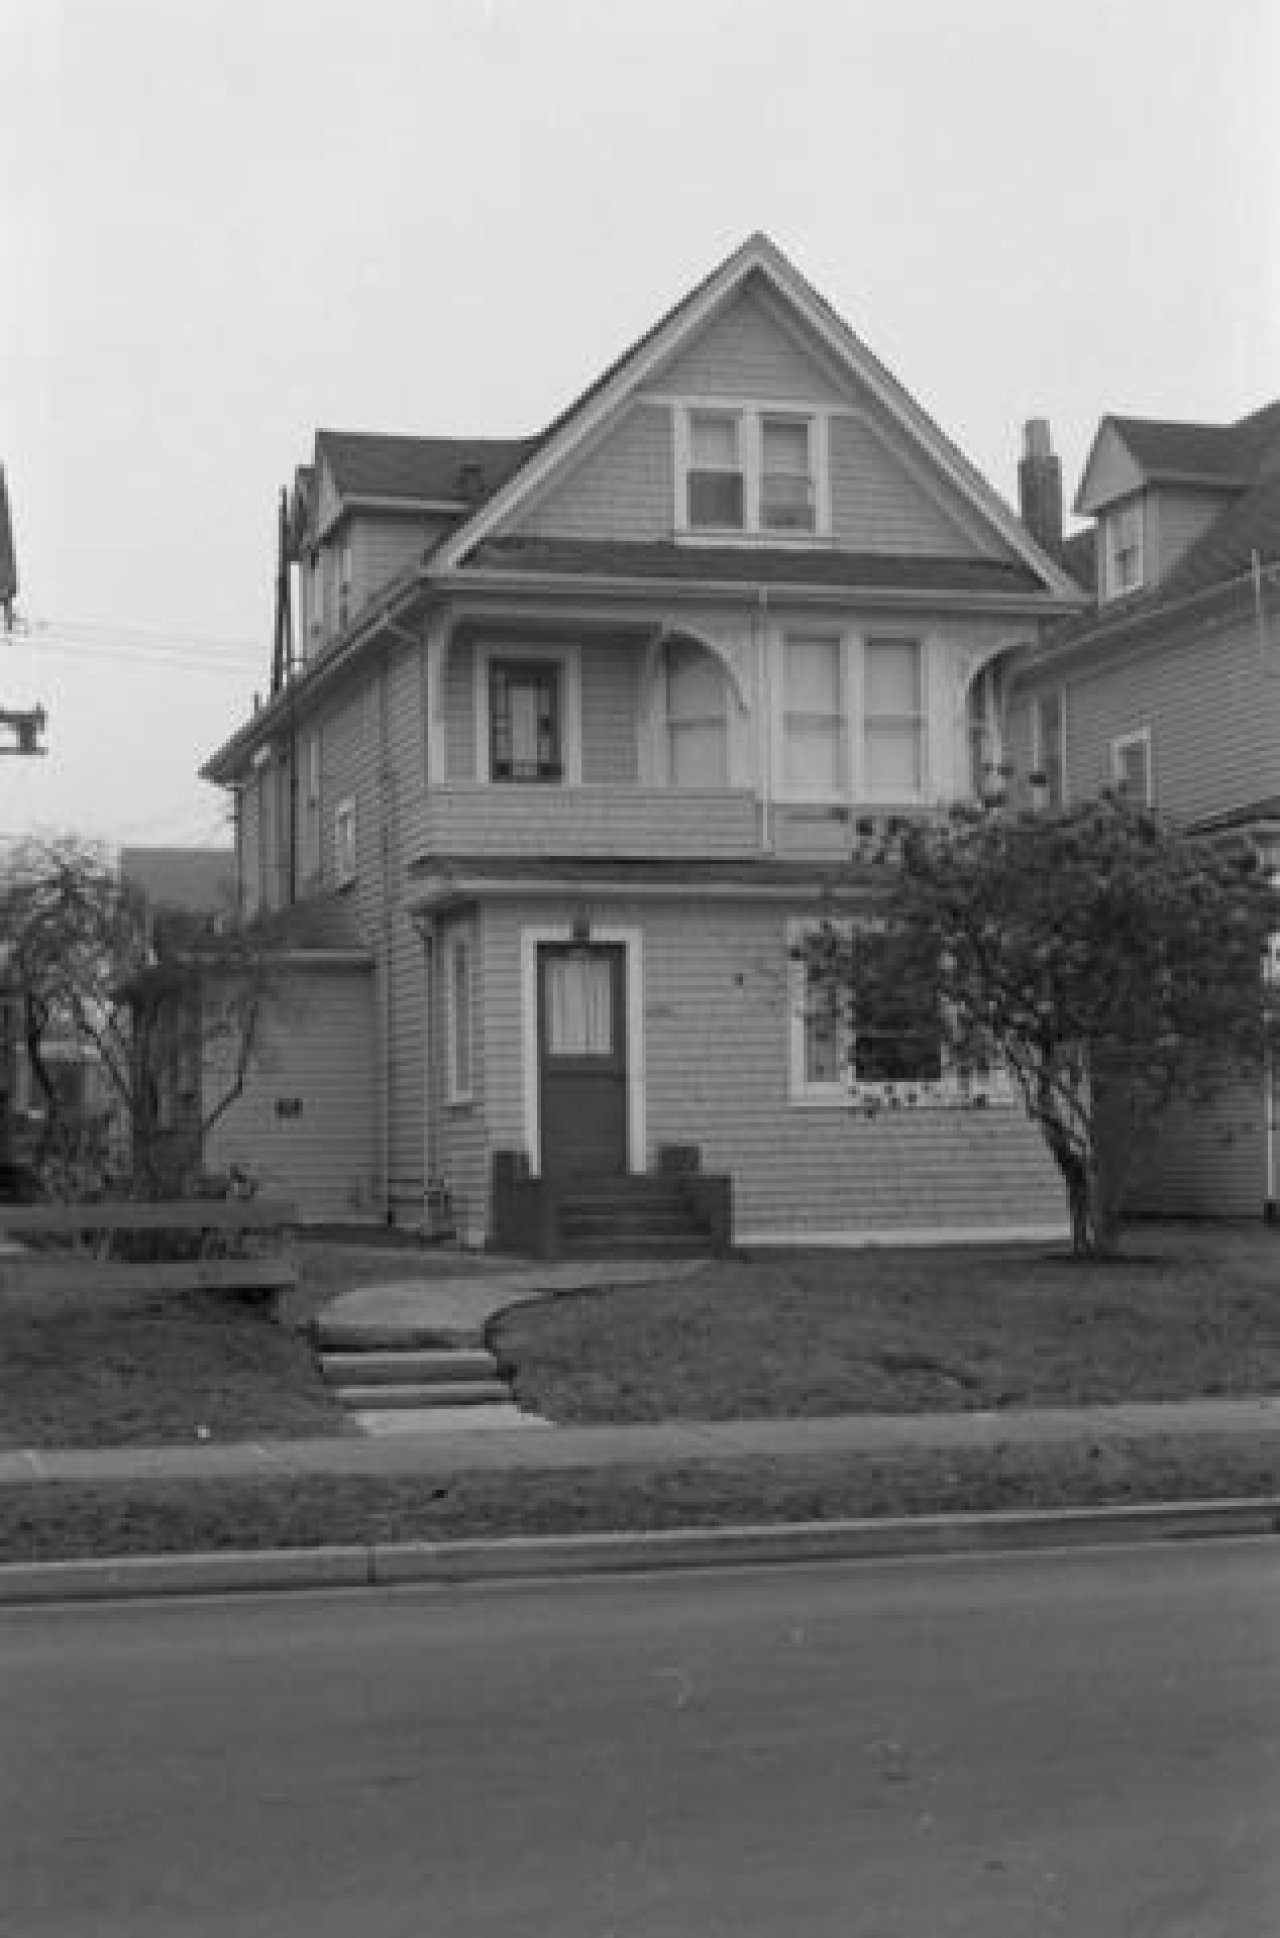 1169 Pendrell Street c. 1985

Source: City of Vancouver Archives Item : CVA 791-0643 - 1169 Pendrell Street